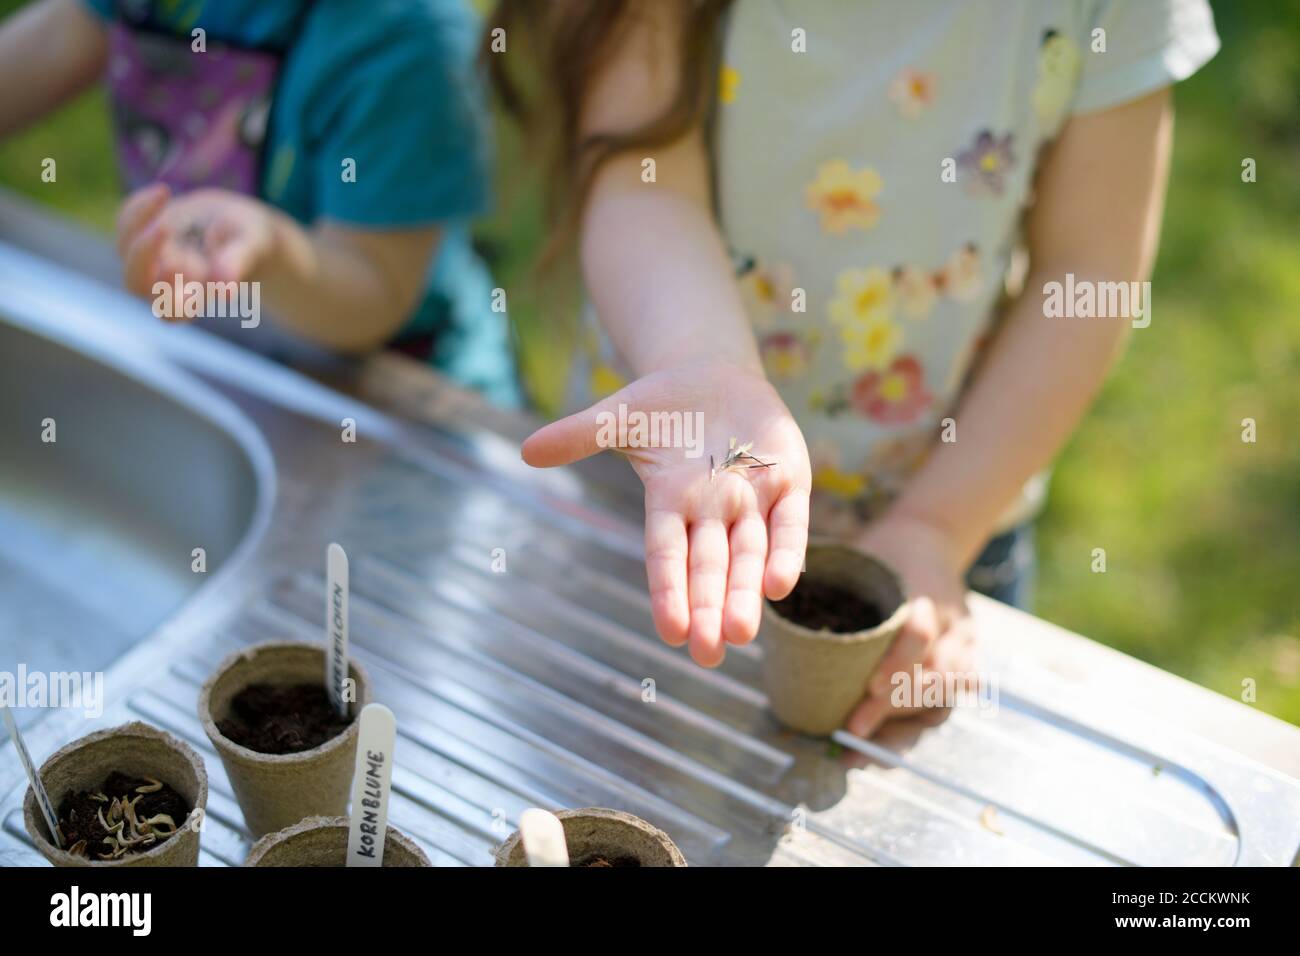 Girl's hand holding seeds while gardening with sister at table in garden Stock Photo